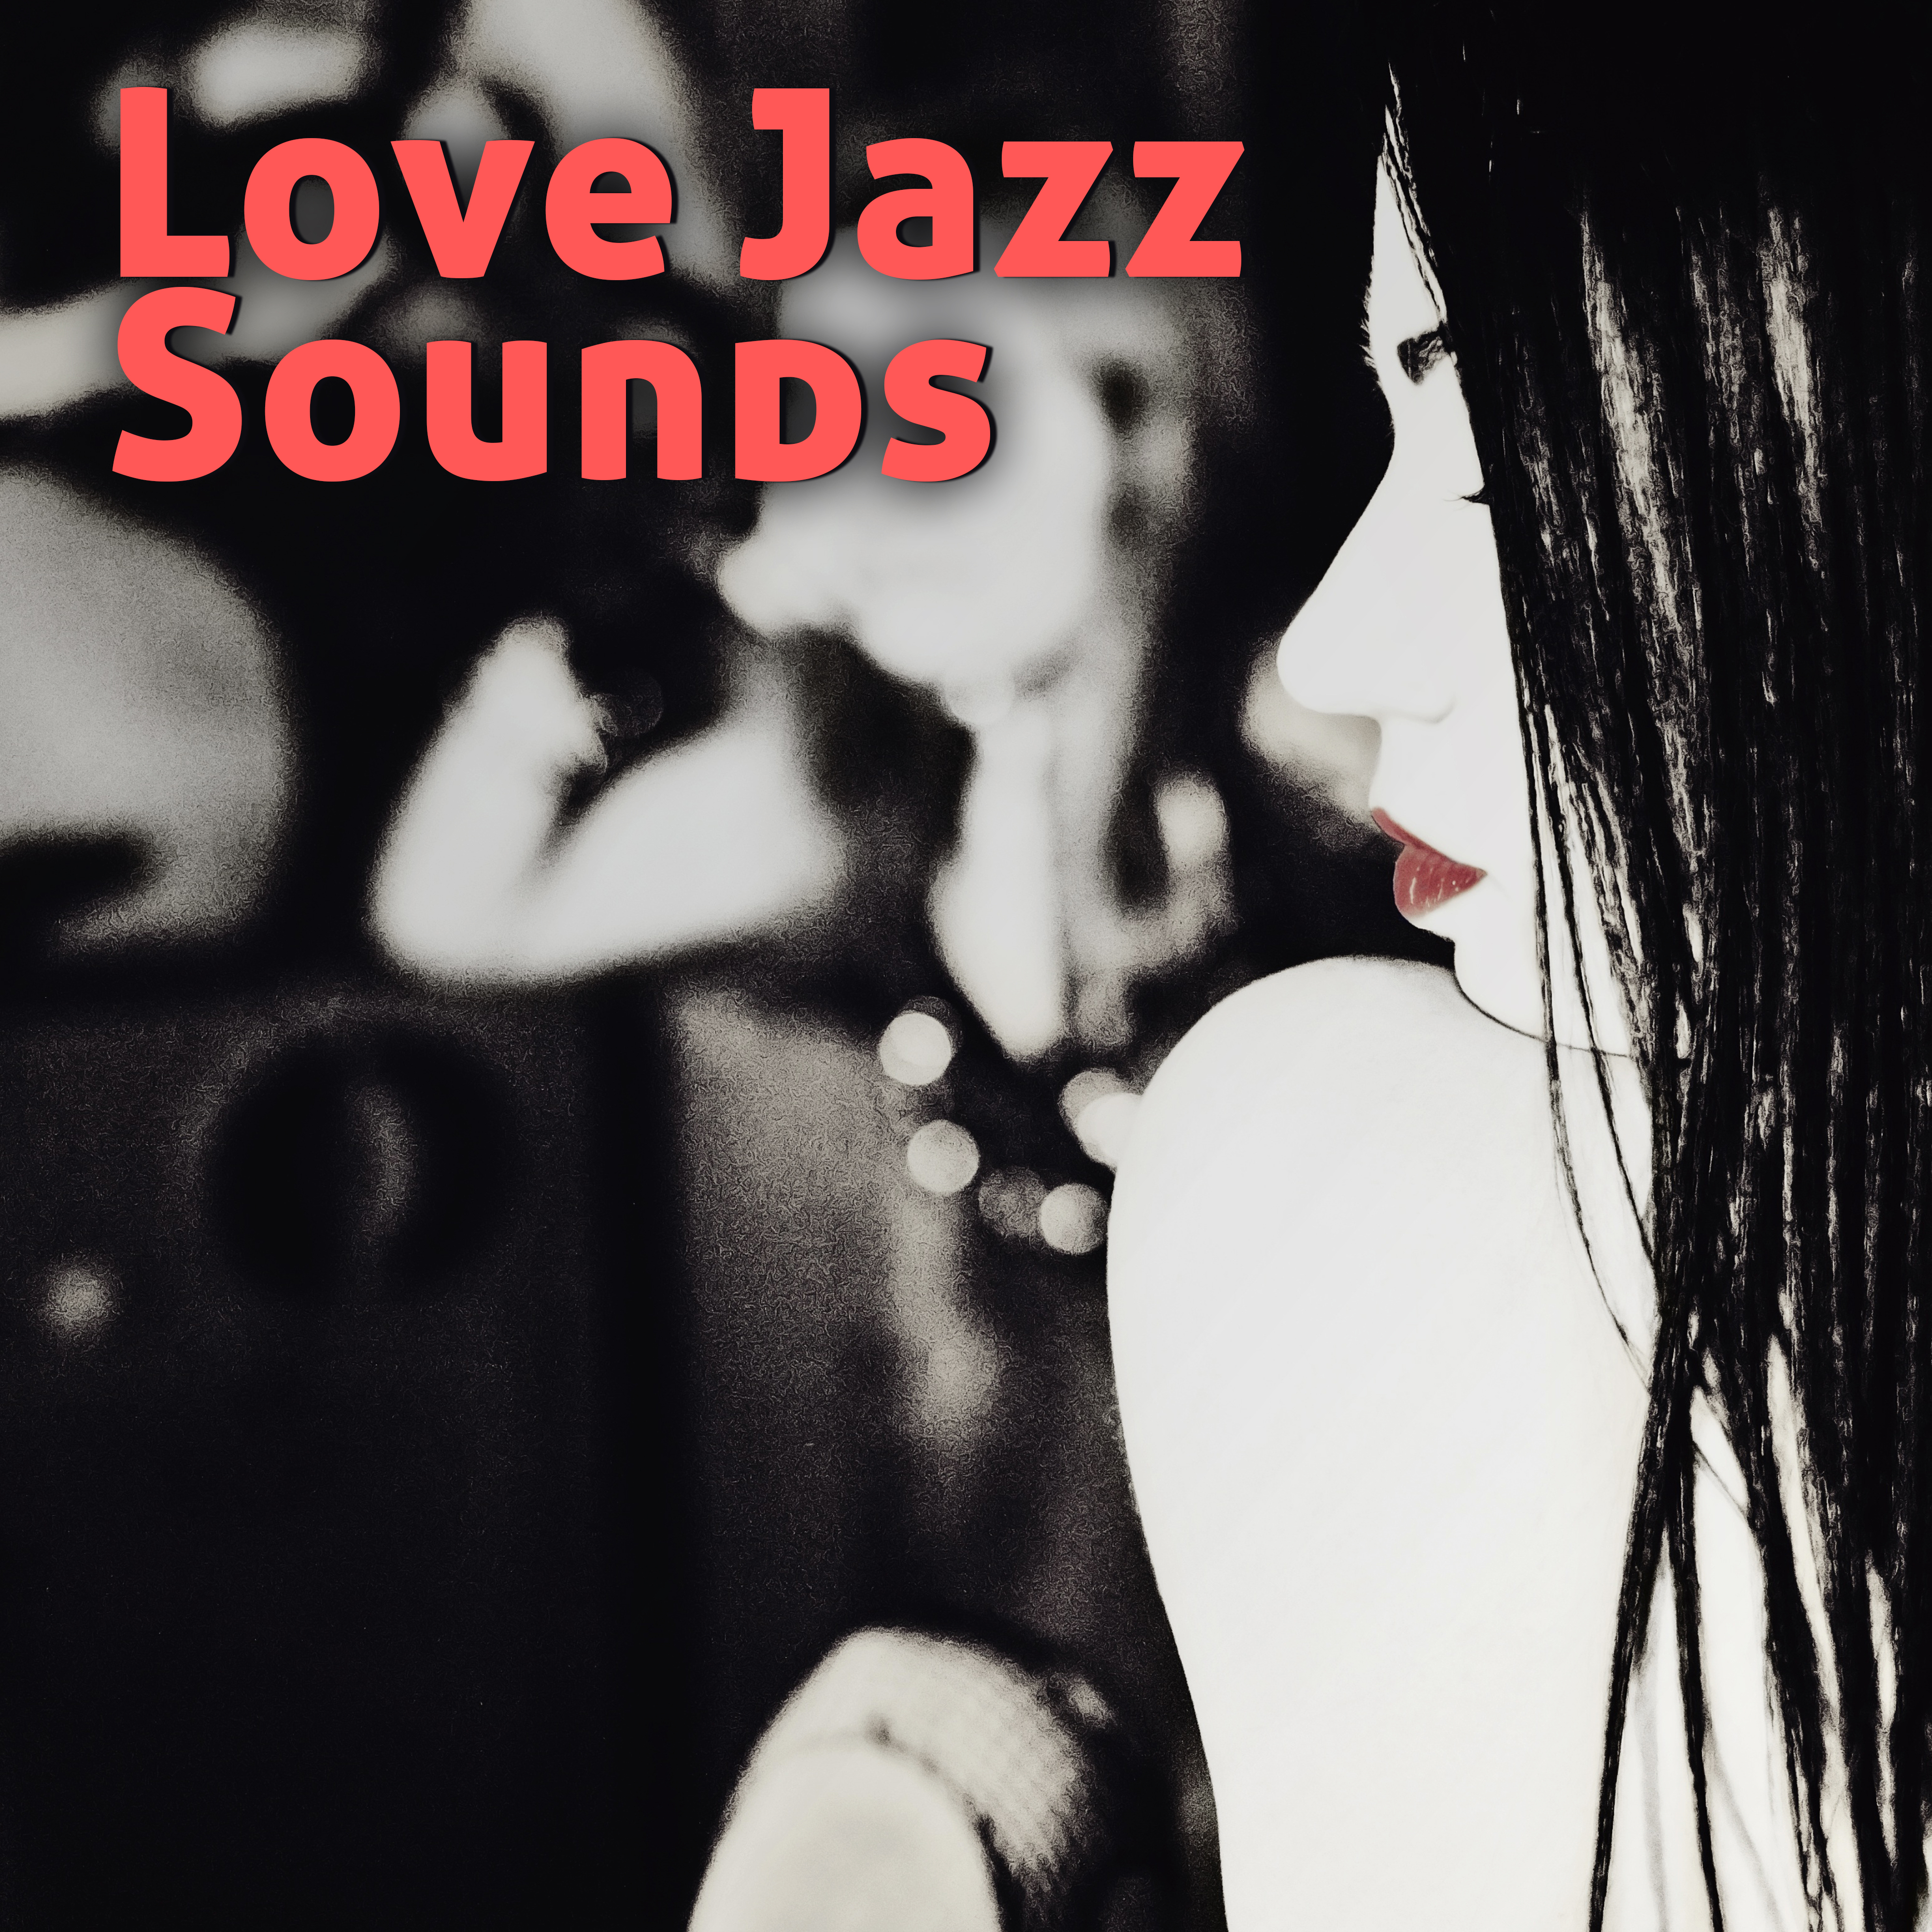 Love Jazz Sounds  Soothing Jazz, Music to Relax, Piano Sounds, Moonlight Note